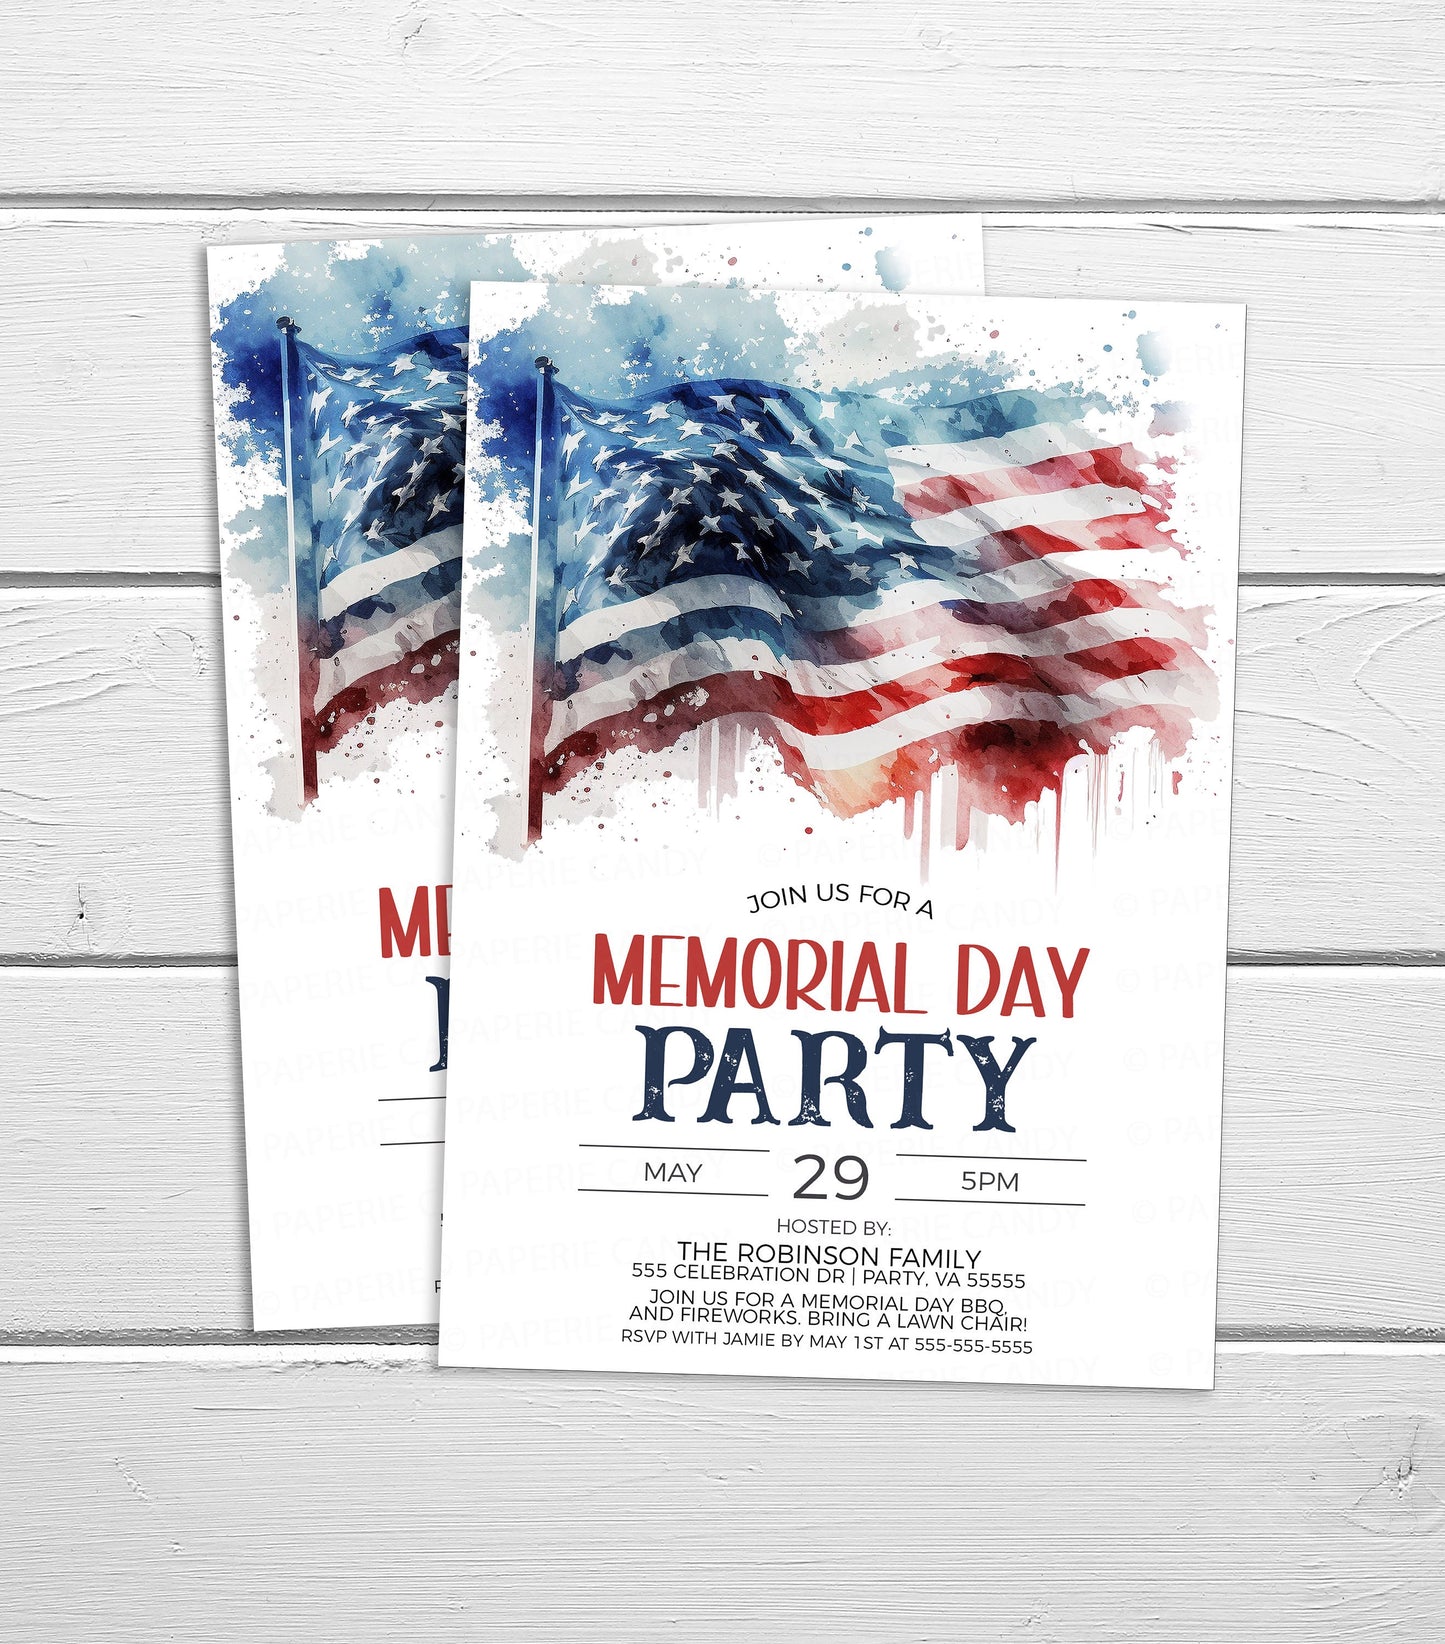 Memorial Day Invitation, Memorial Day Party Invite, Memorial Day BBQ, Memorial Day Fireworks Parade Event, Editable Printable Template